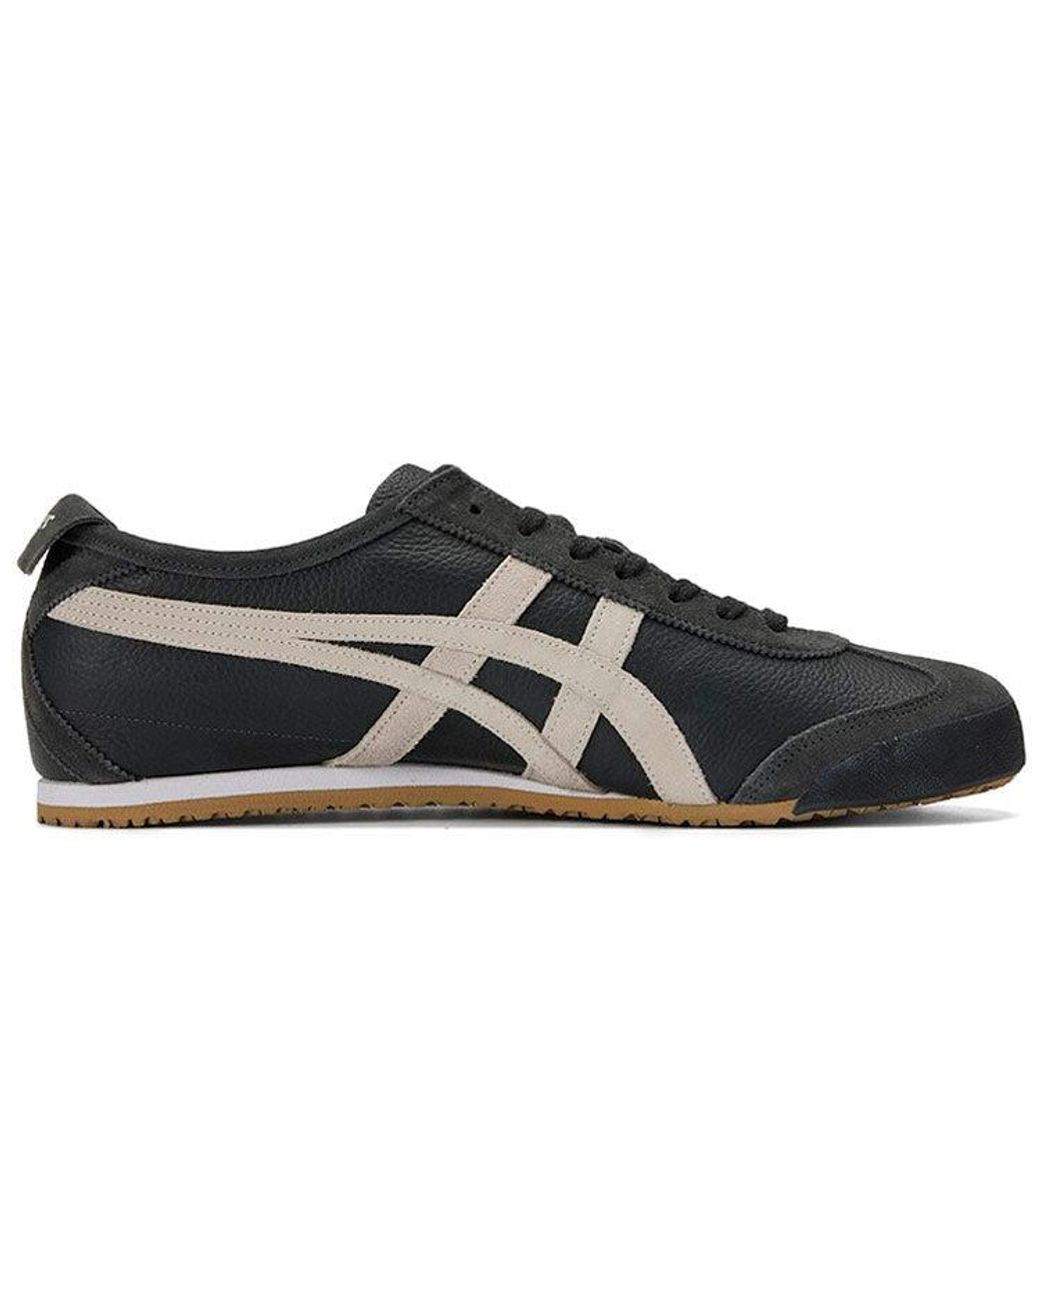 Onitsuka Tiger Mexico 66 Low-running Shoes Black/brown for | Lyst